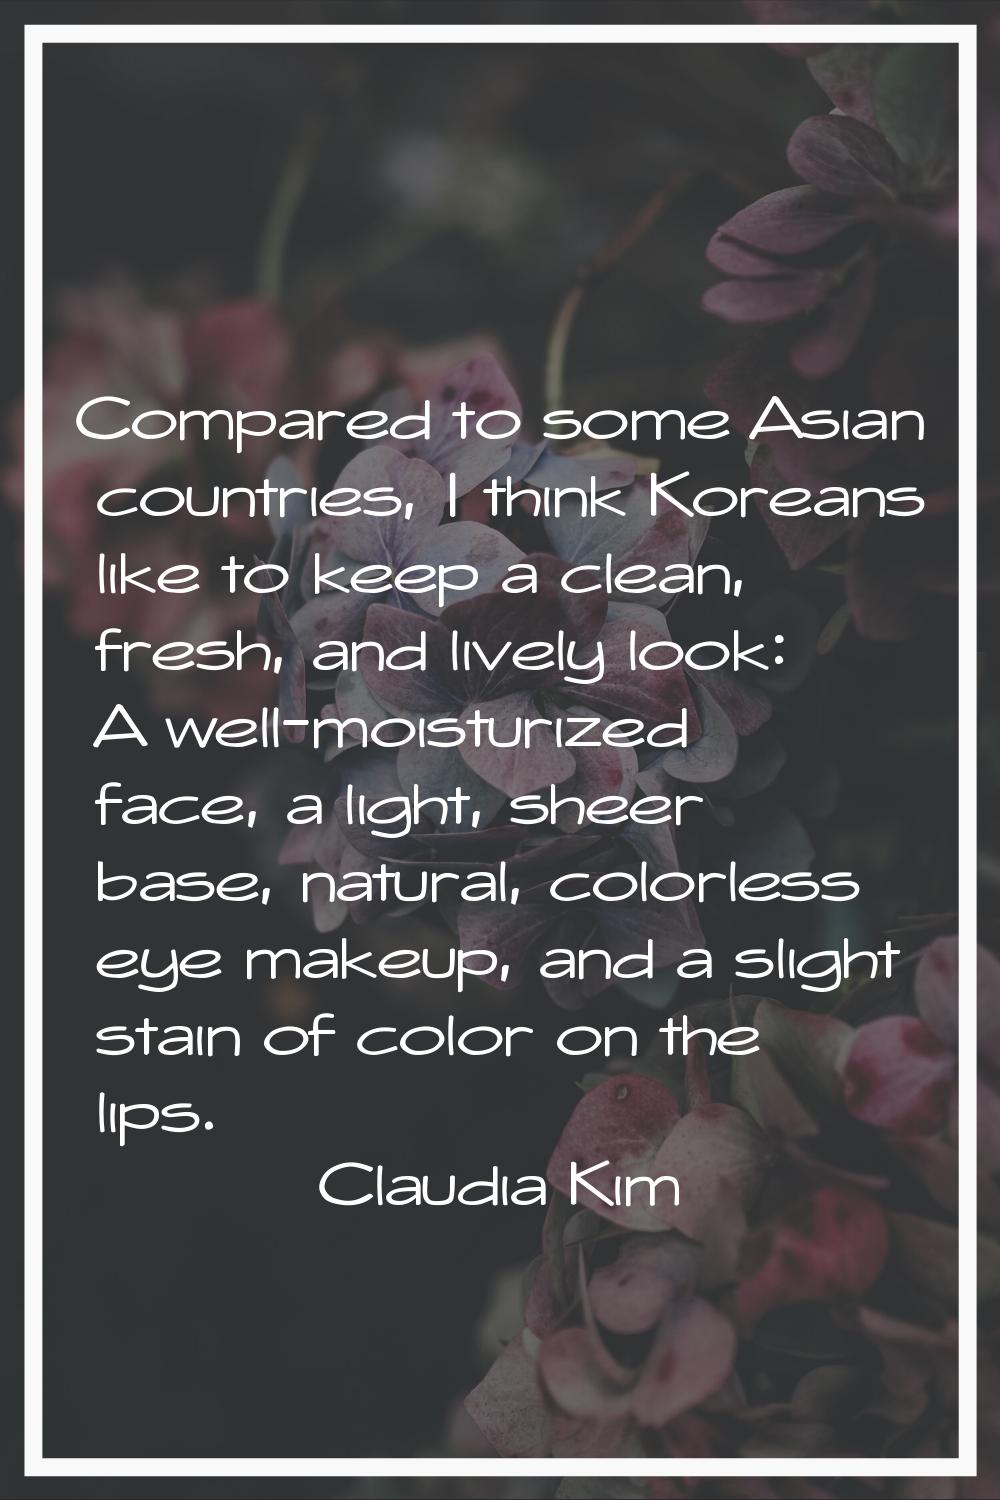 Compared to some Asian countries, I think Koreans like to keep a clean, fresh, and lively look: A w